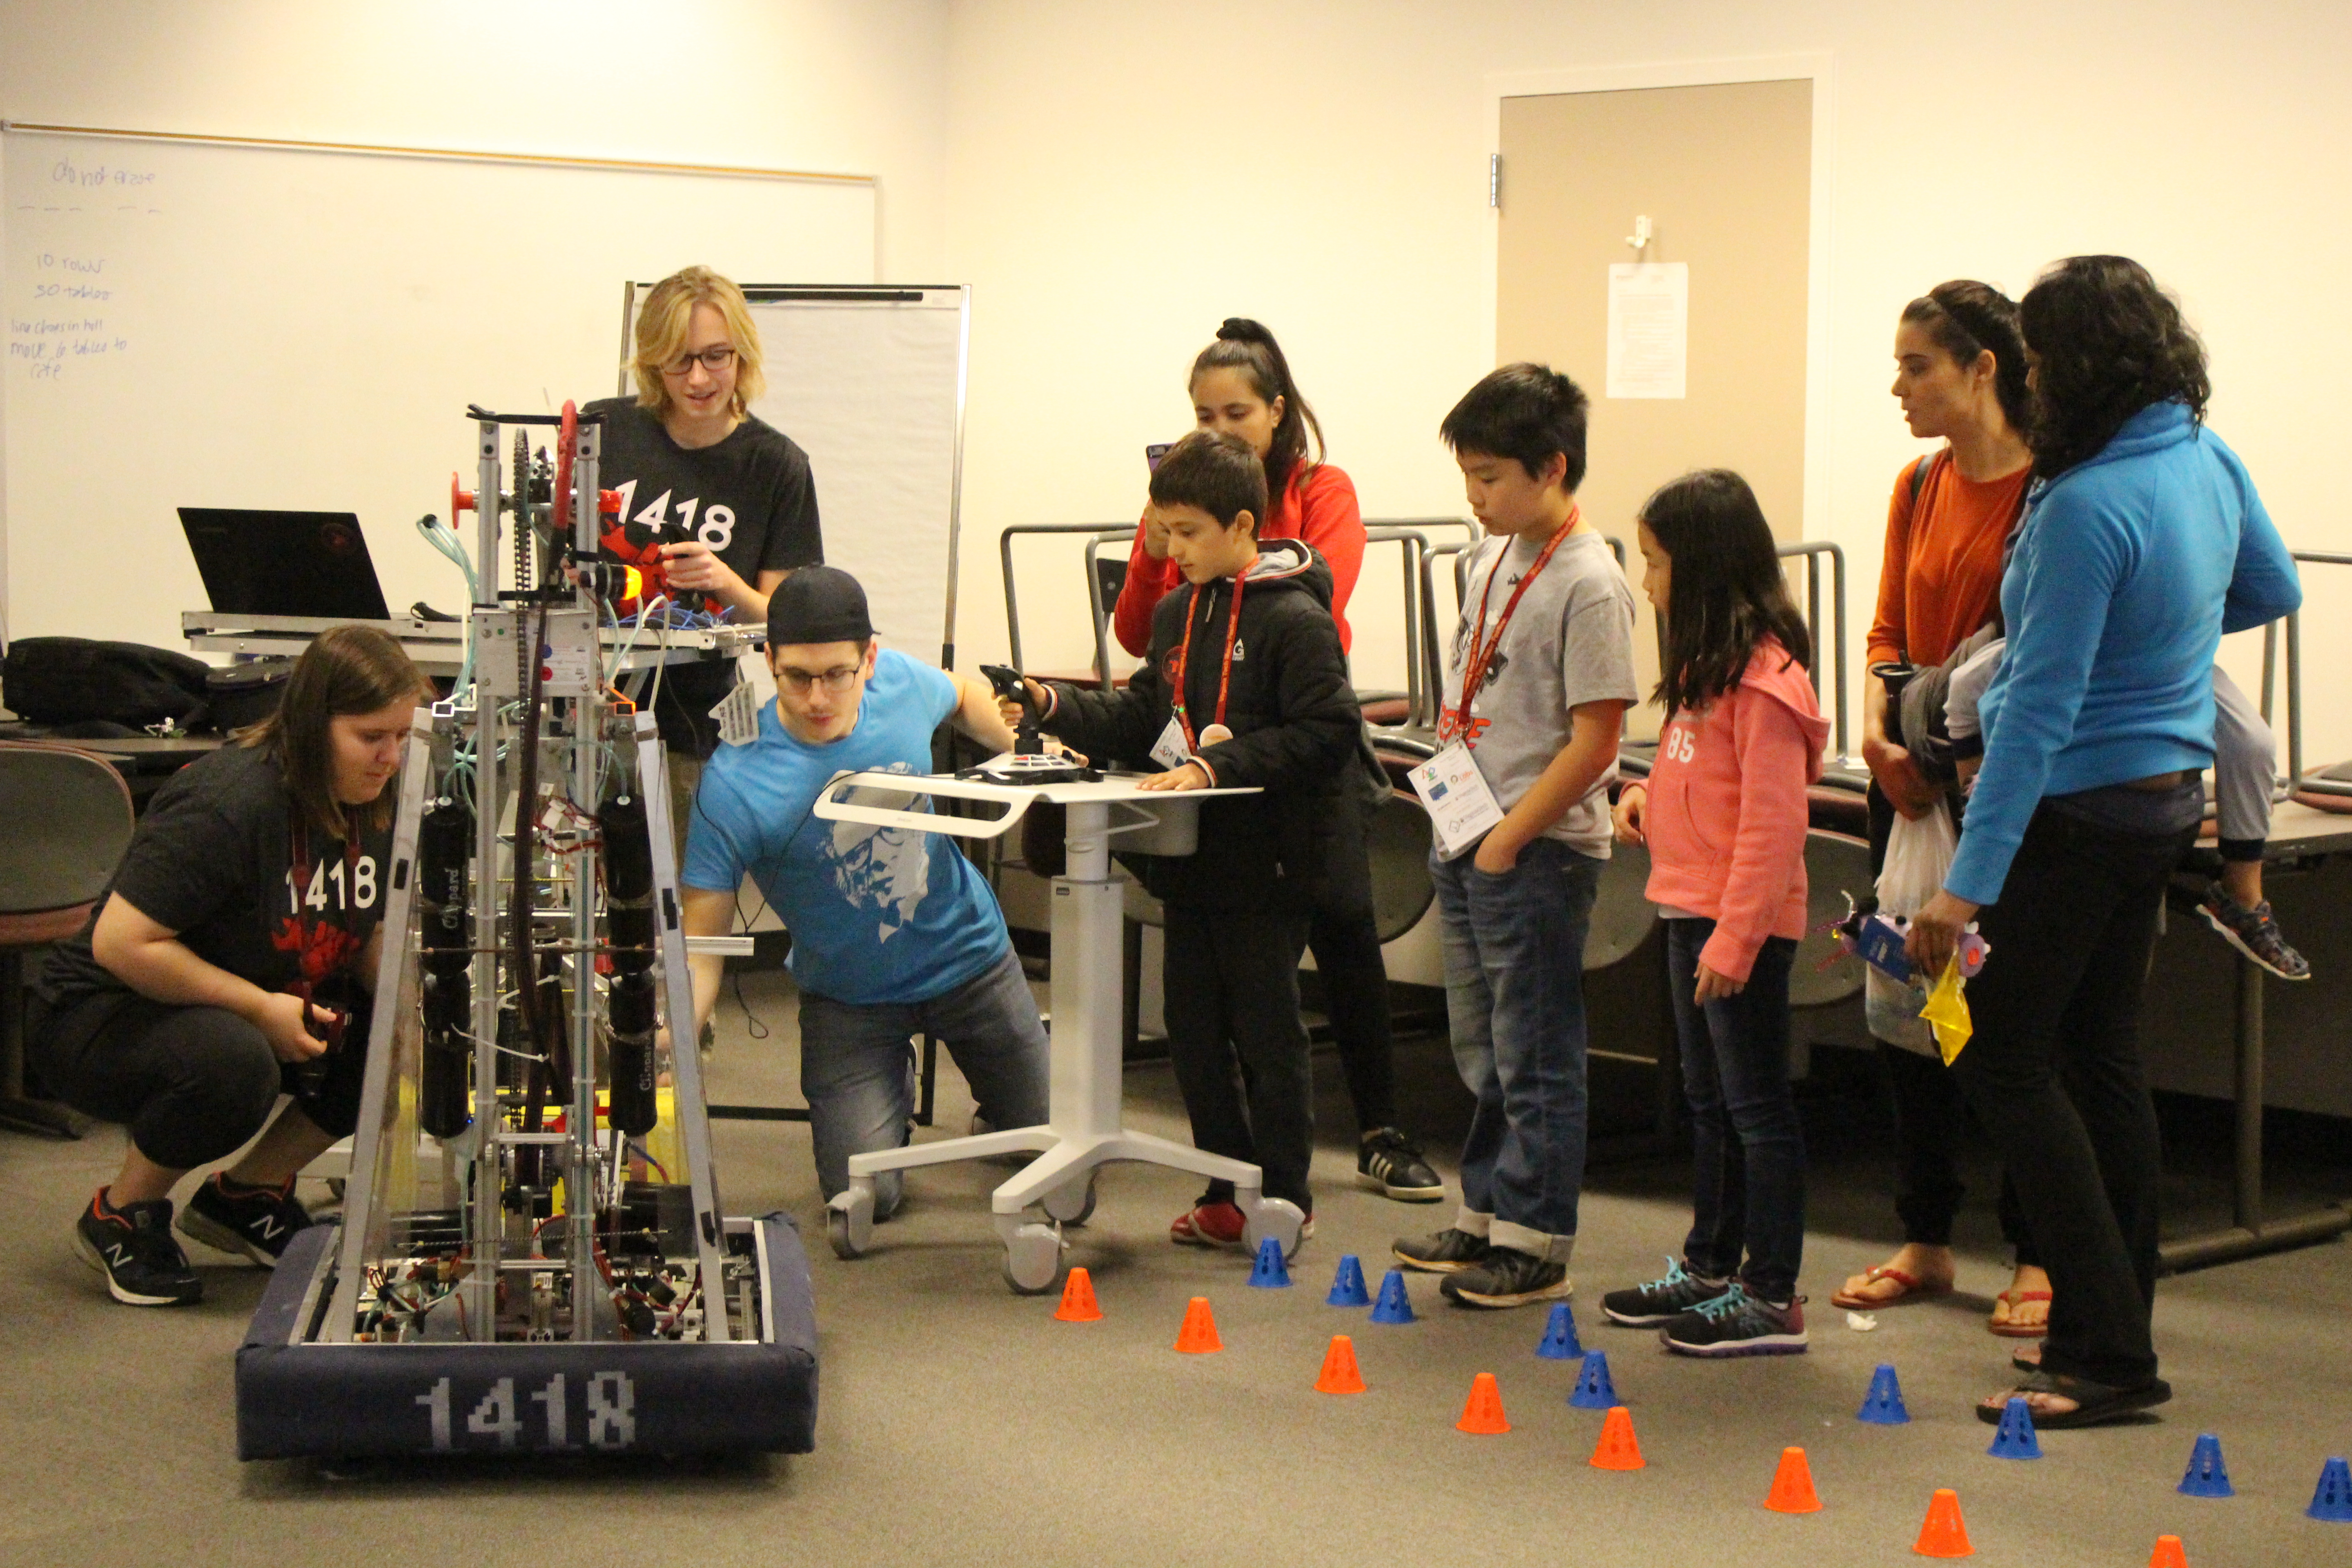 Children line up to drive the robot.